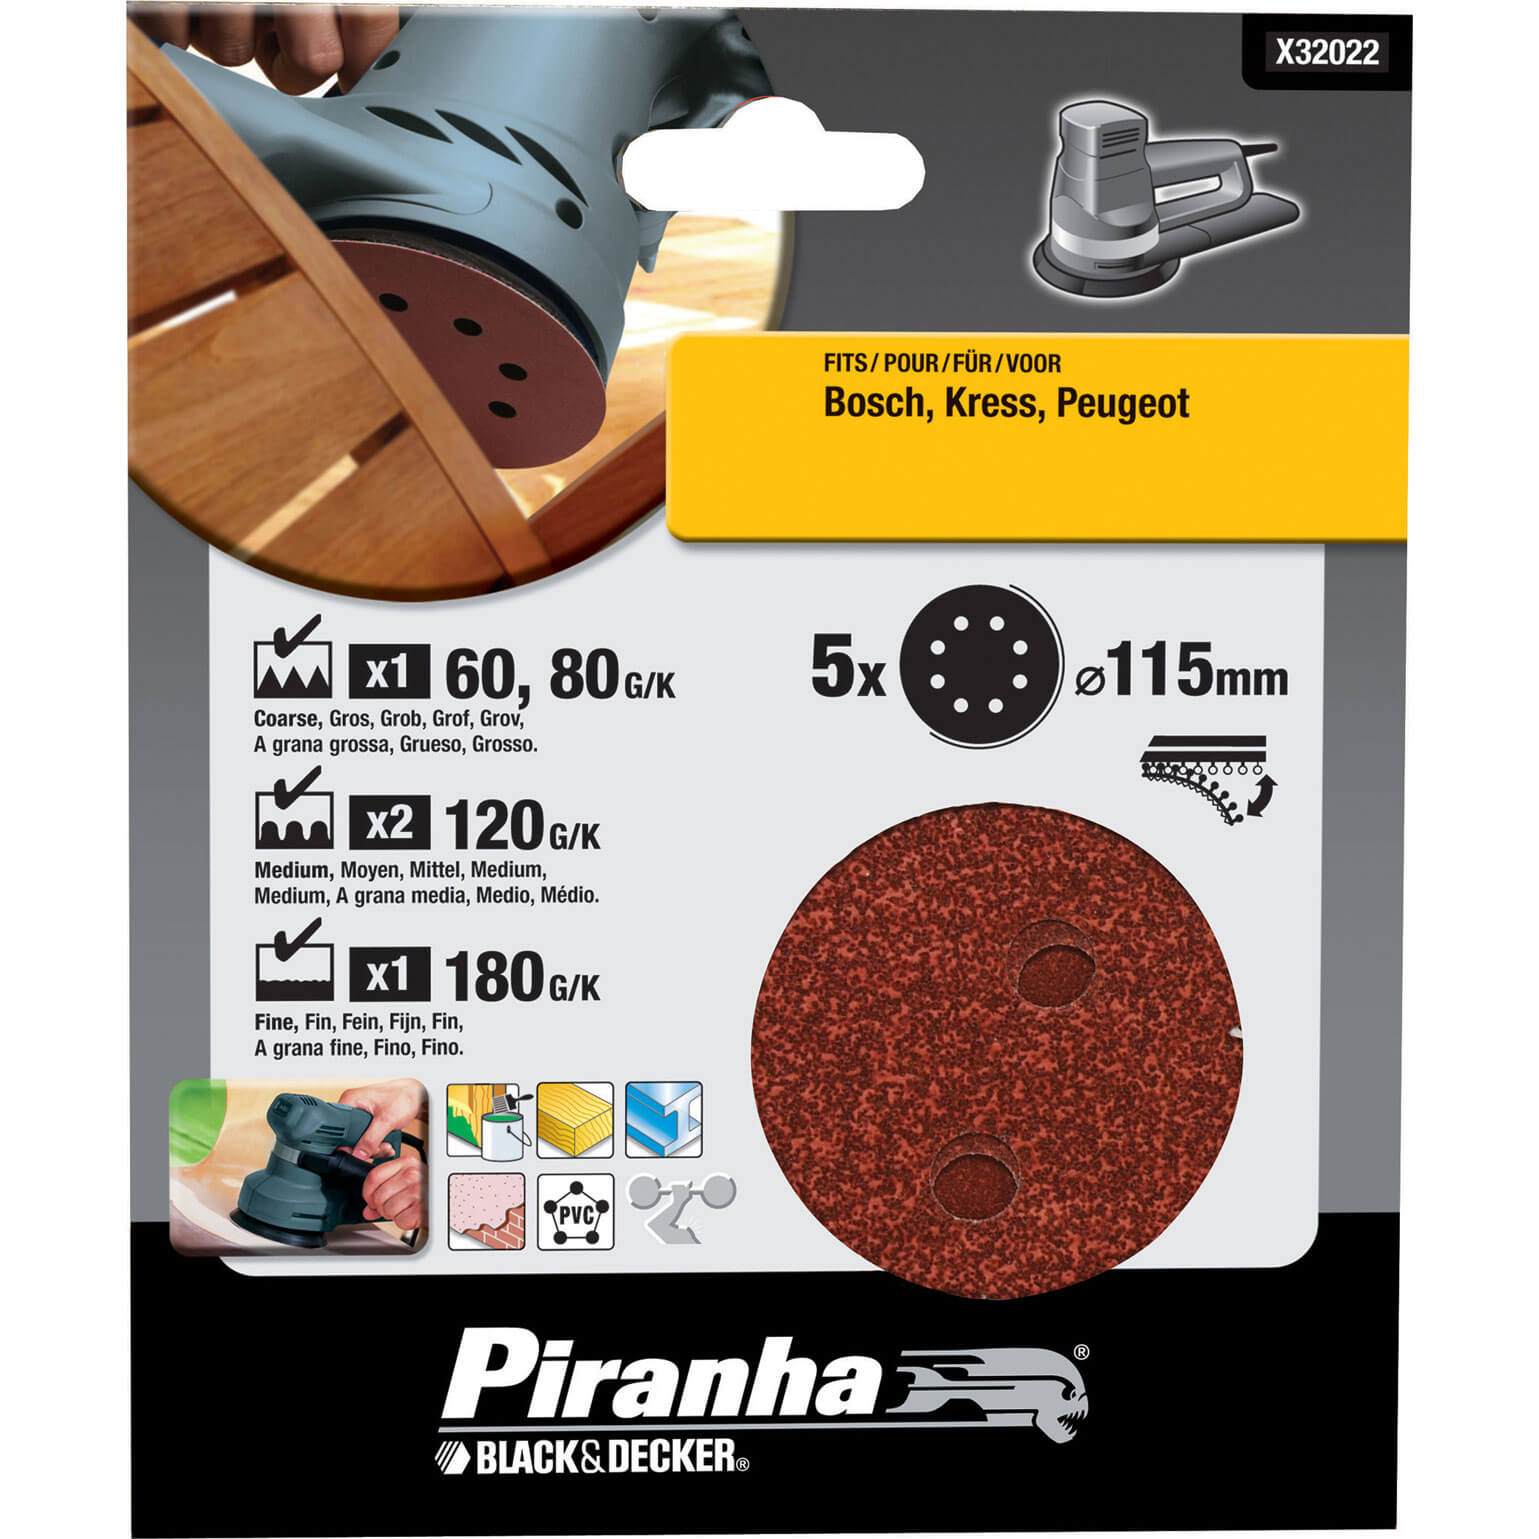 Image of Black and Decker Piranha Quick Fit ROS Sanding Discs 115mm 115mm Assorted Pack of 5